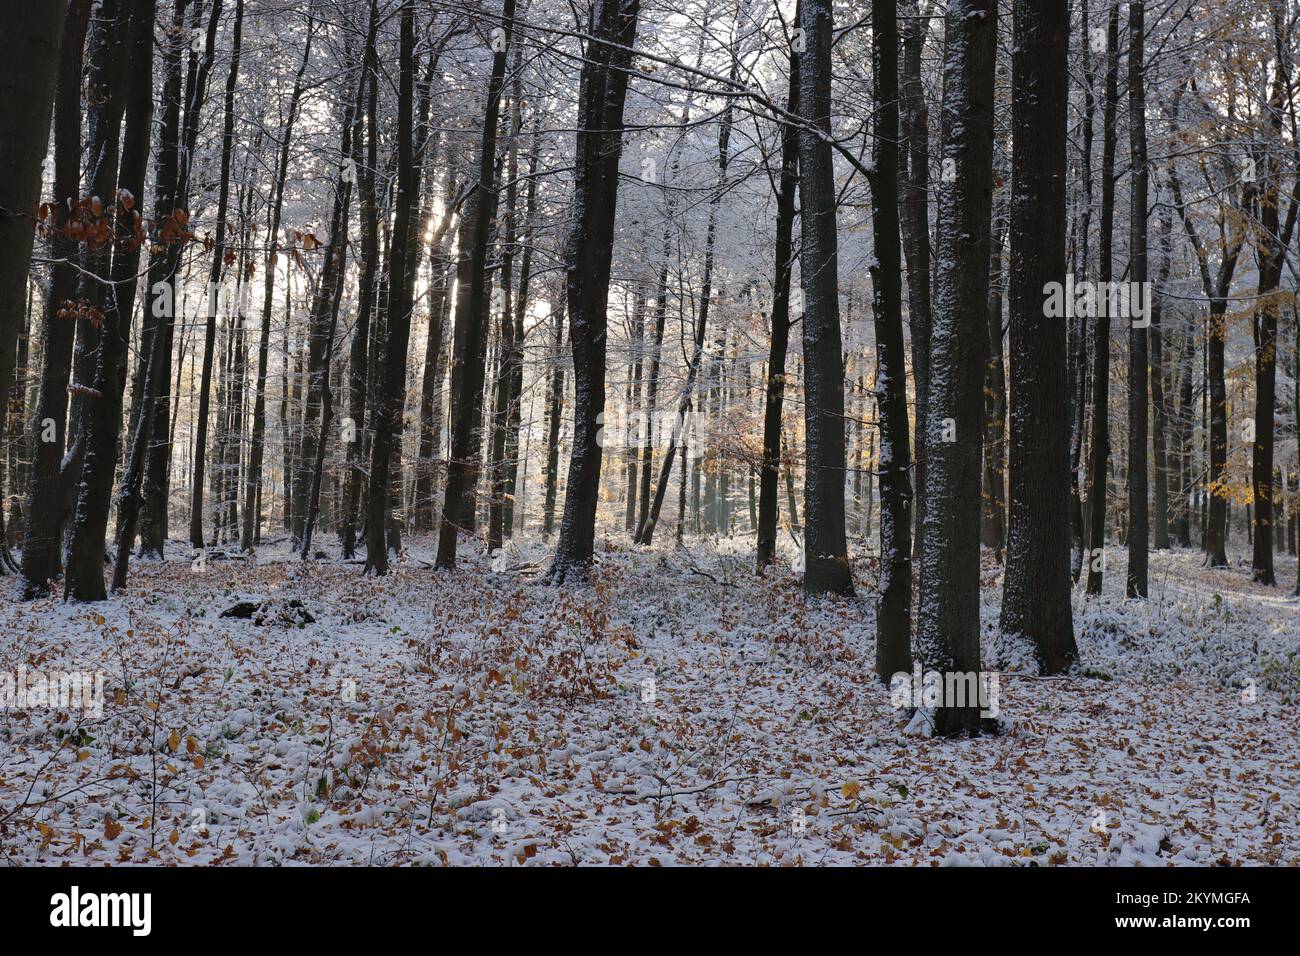 View of dark tree trunks in a wintry forest Stock Photo